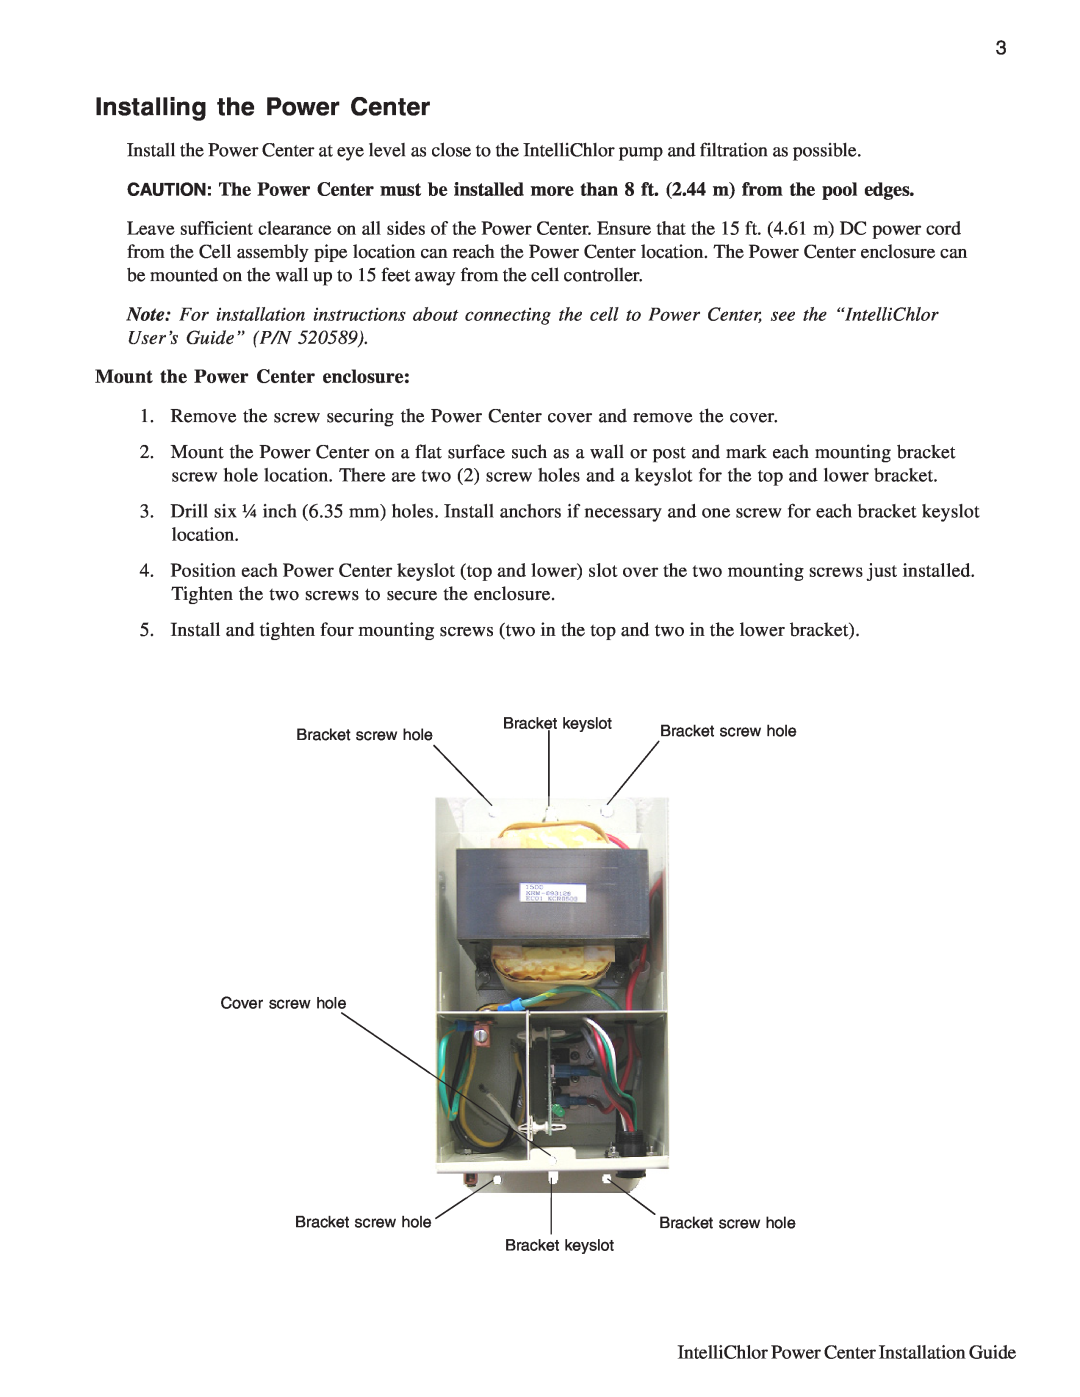 Pentair C40, C20 important safety instructions Installing the Power Center, Mount the Power Center enclosure 